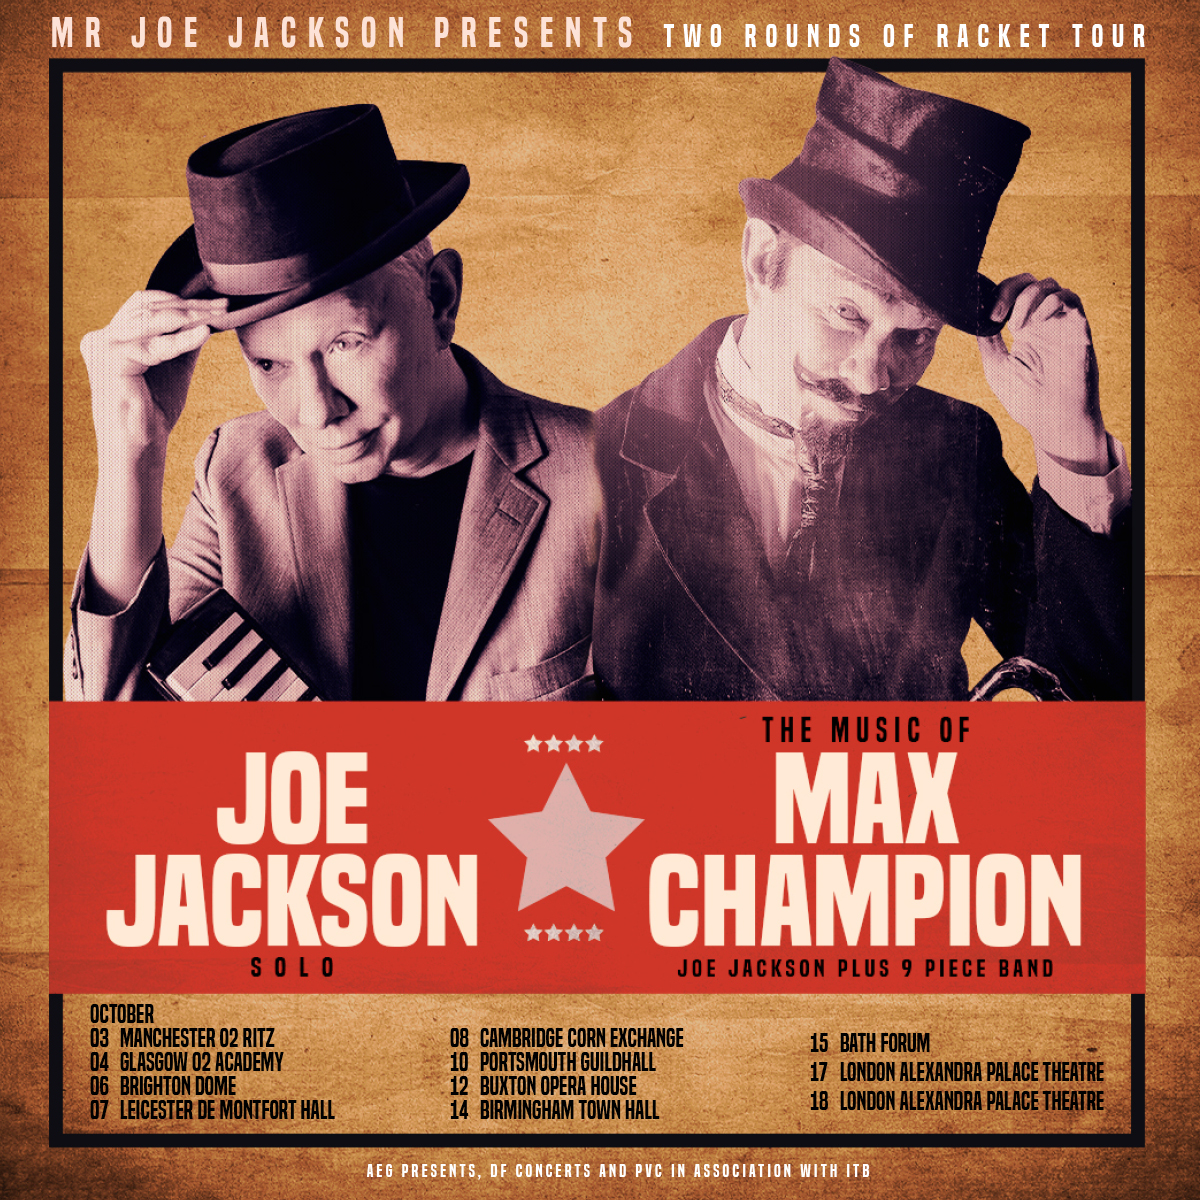 Heading out on 'The Two Rounds Of Racket Tour' @joejacksonmusic heads here Fri 4 Oct for a show in two parts, a solo set of Joe's original songs and a set based on the album 'What A Racket!' Get 48-hour early access Priority Tickets from 10am Mon 11 Mar👉 amg-venues.com/wrEX50QOrPt